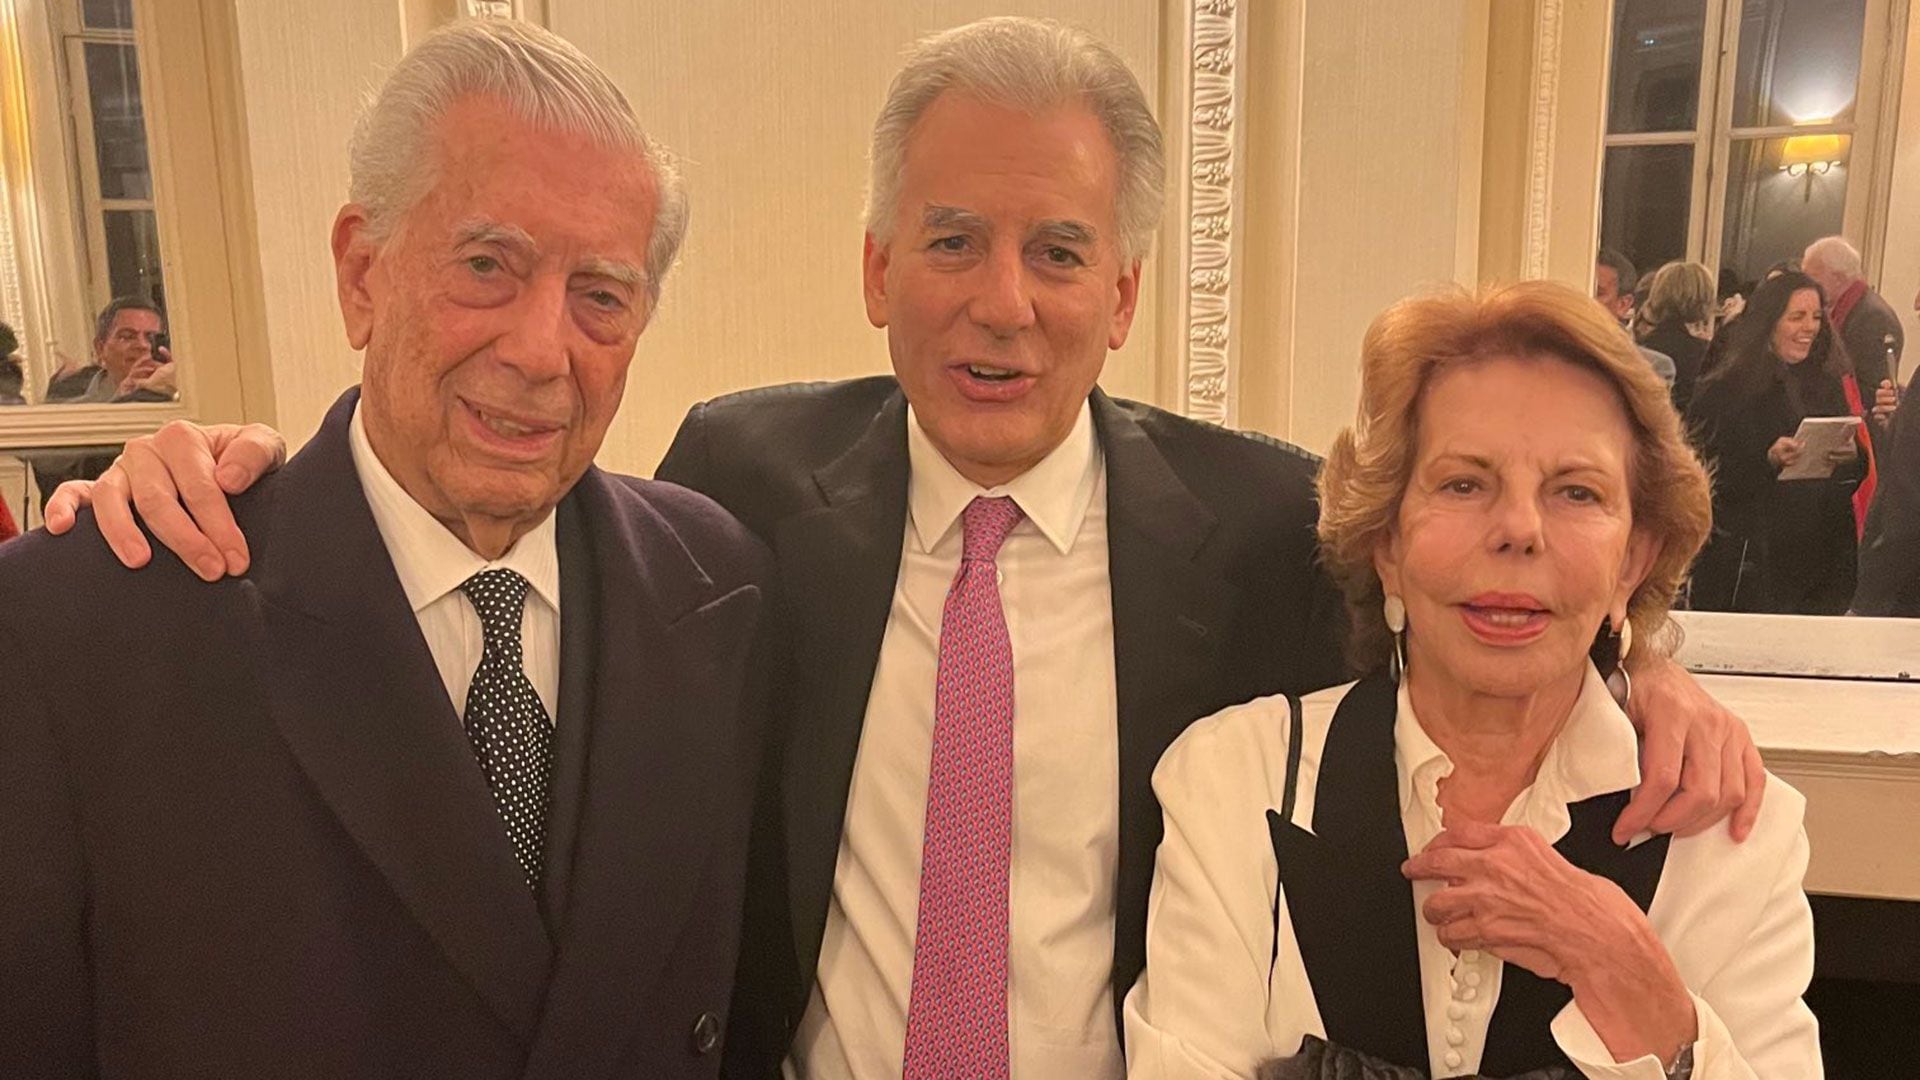 Mario Vargas Llosa, his son Álvaro and his ex-wife Patricia Llosa, in Paris, for the writer's admission to the French Academy, February 2023. (Twitter @AlvaroVargasLl)